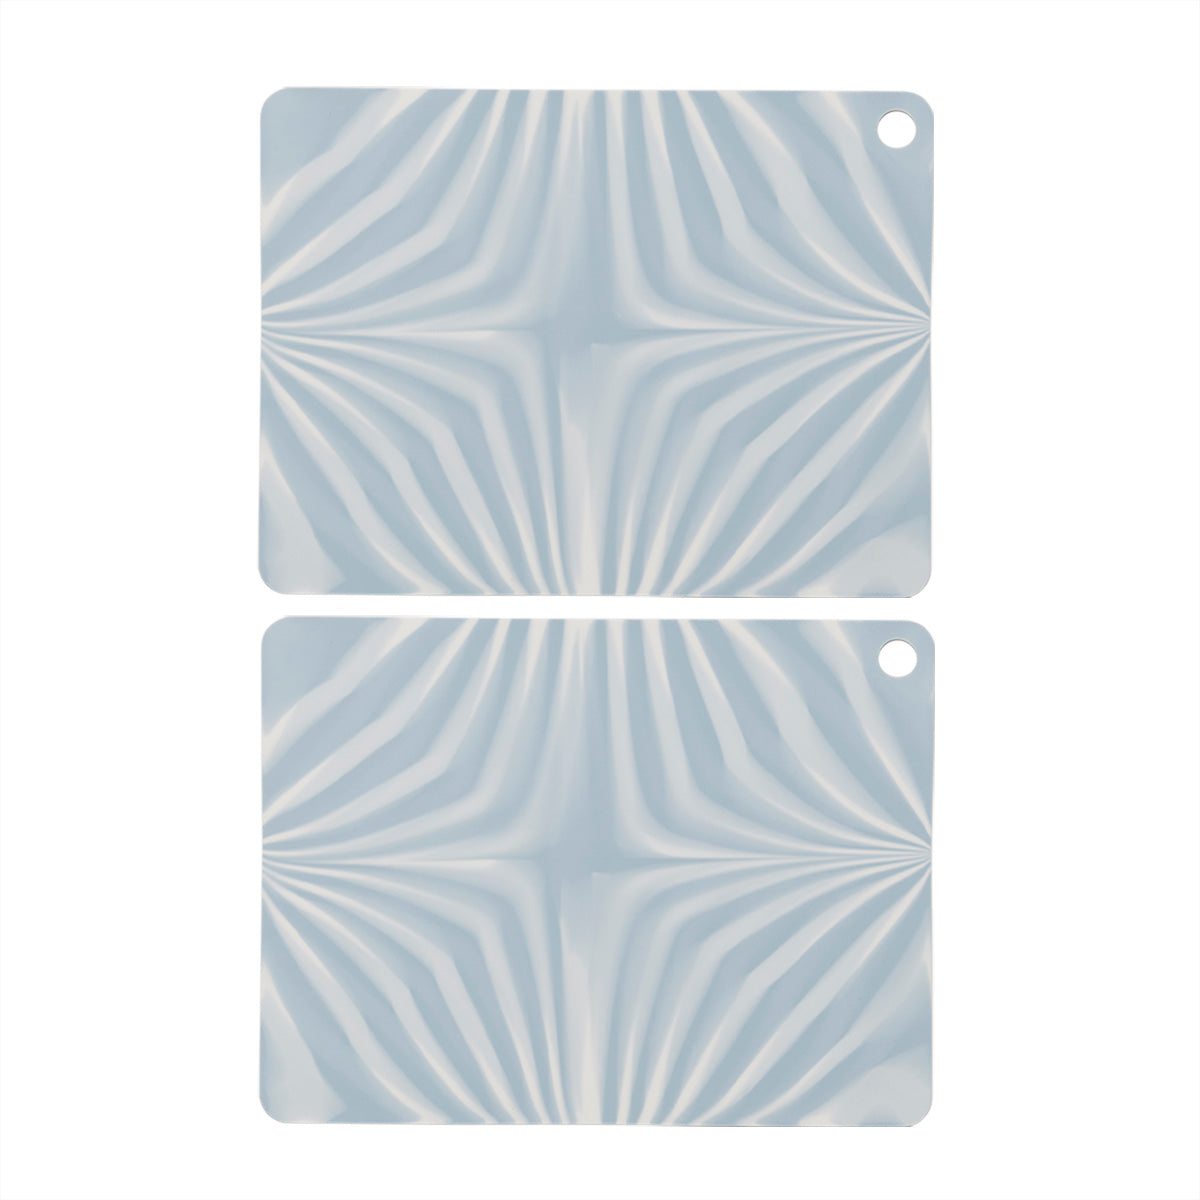 OYOY LIVING Placemat Zebura - Pack of 2 Placemat